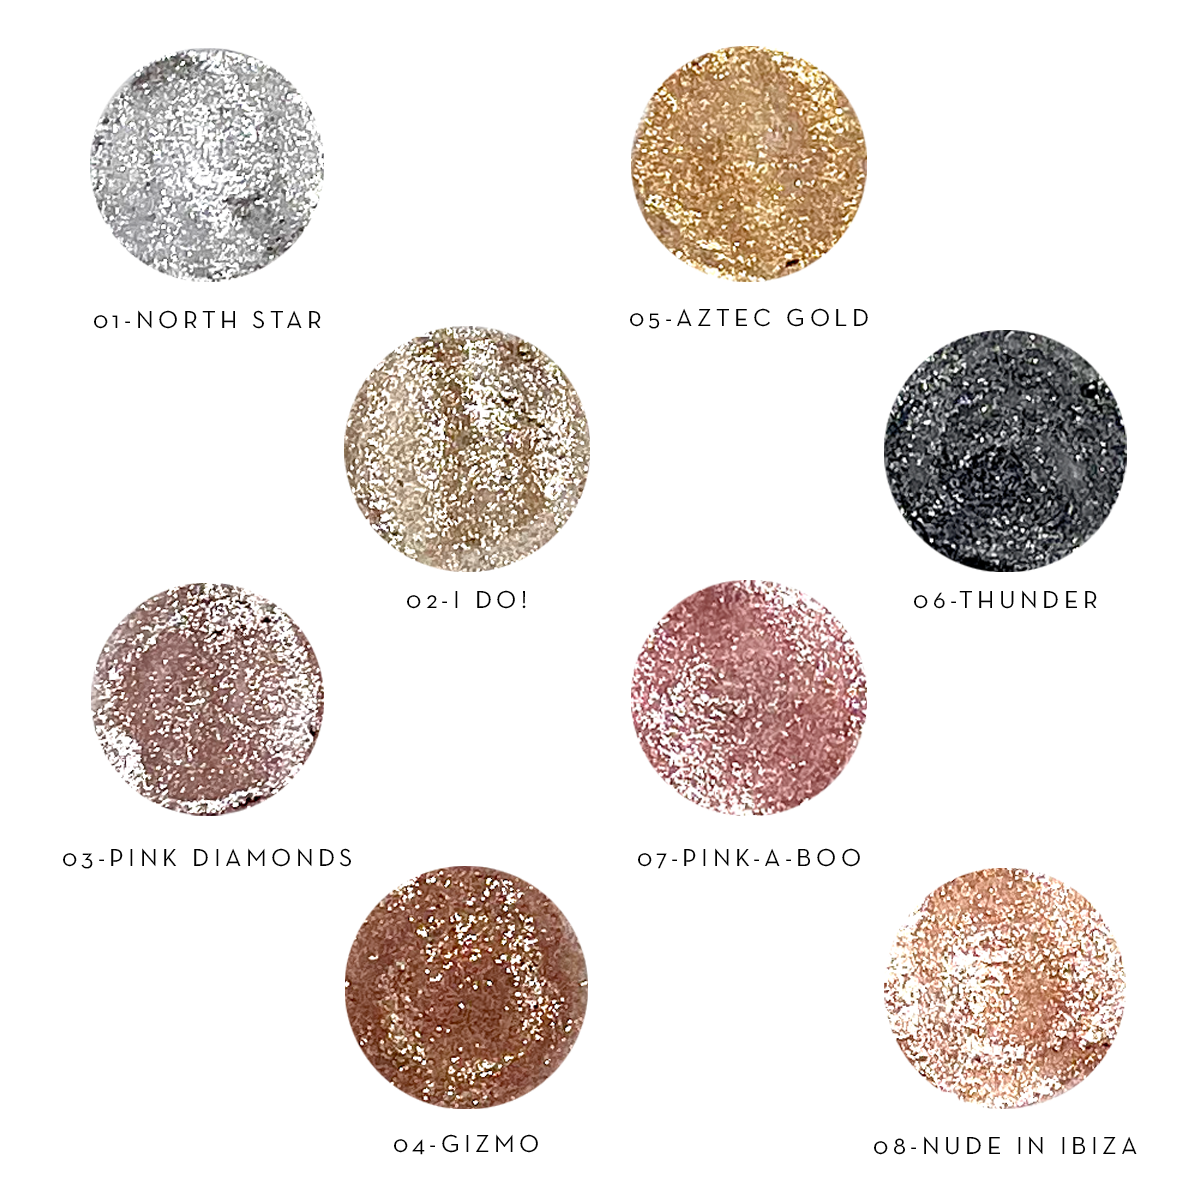 SWATCHES_d51736a9-329e-4df1-a7f9-29fecfbed71f.png